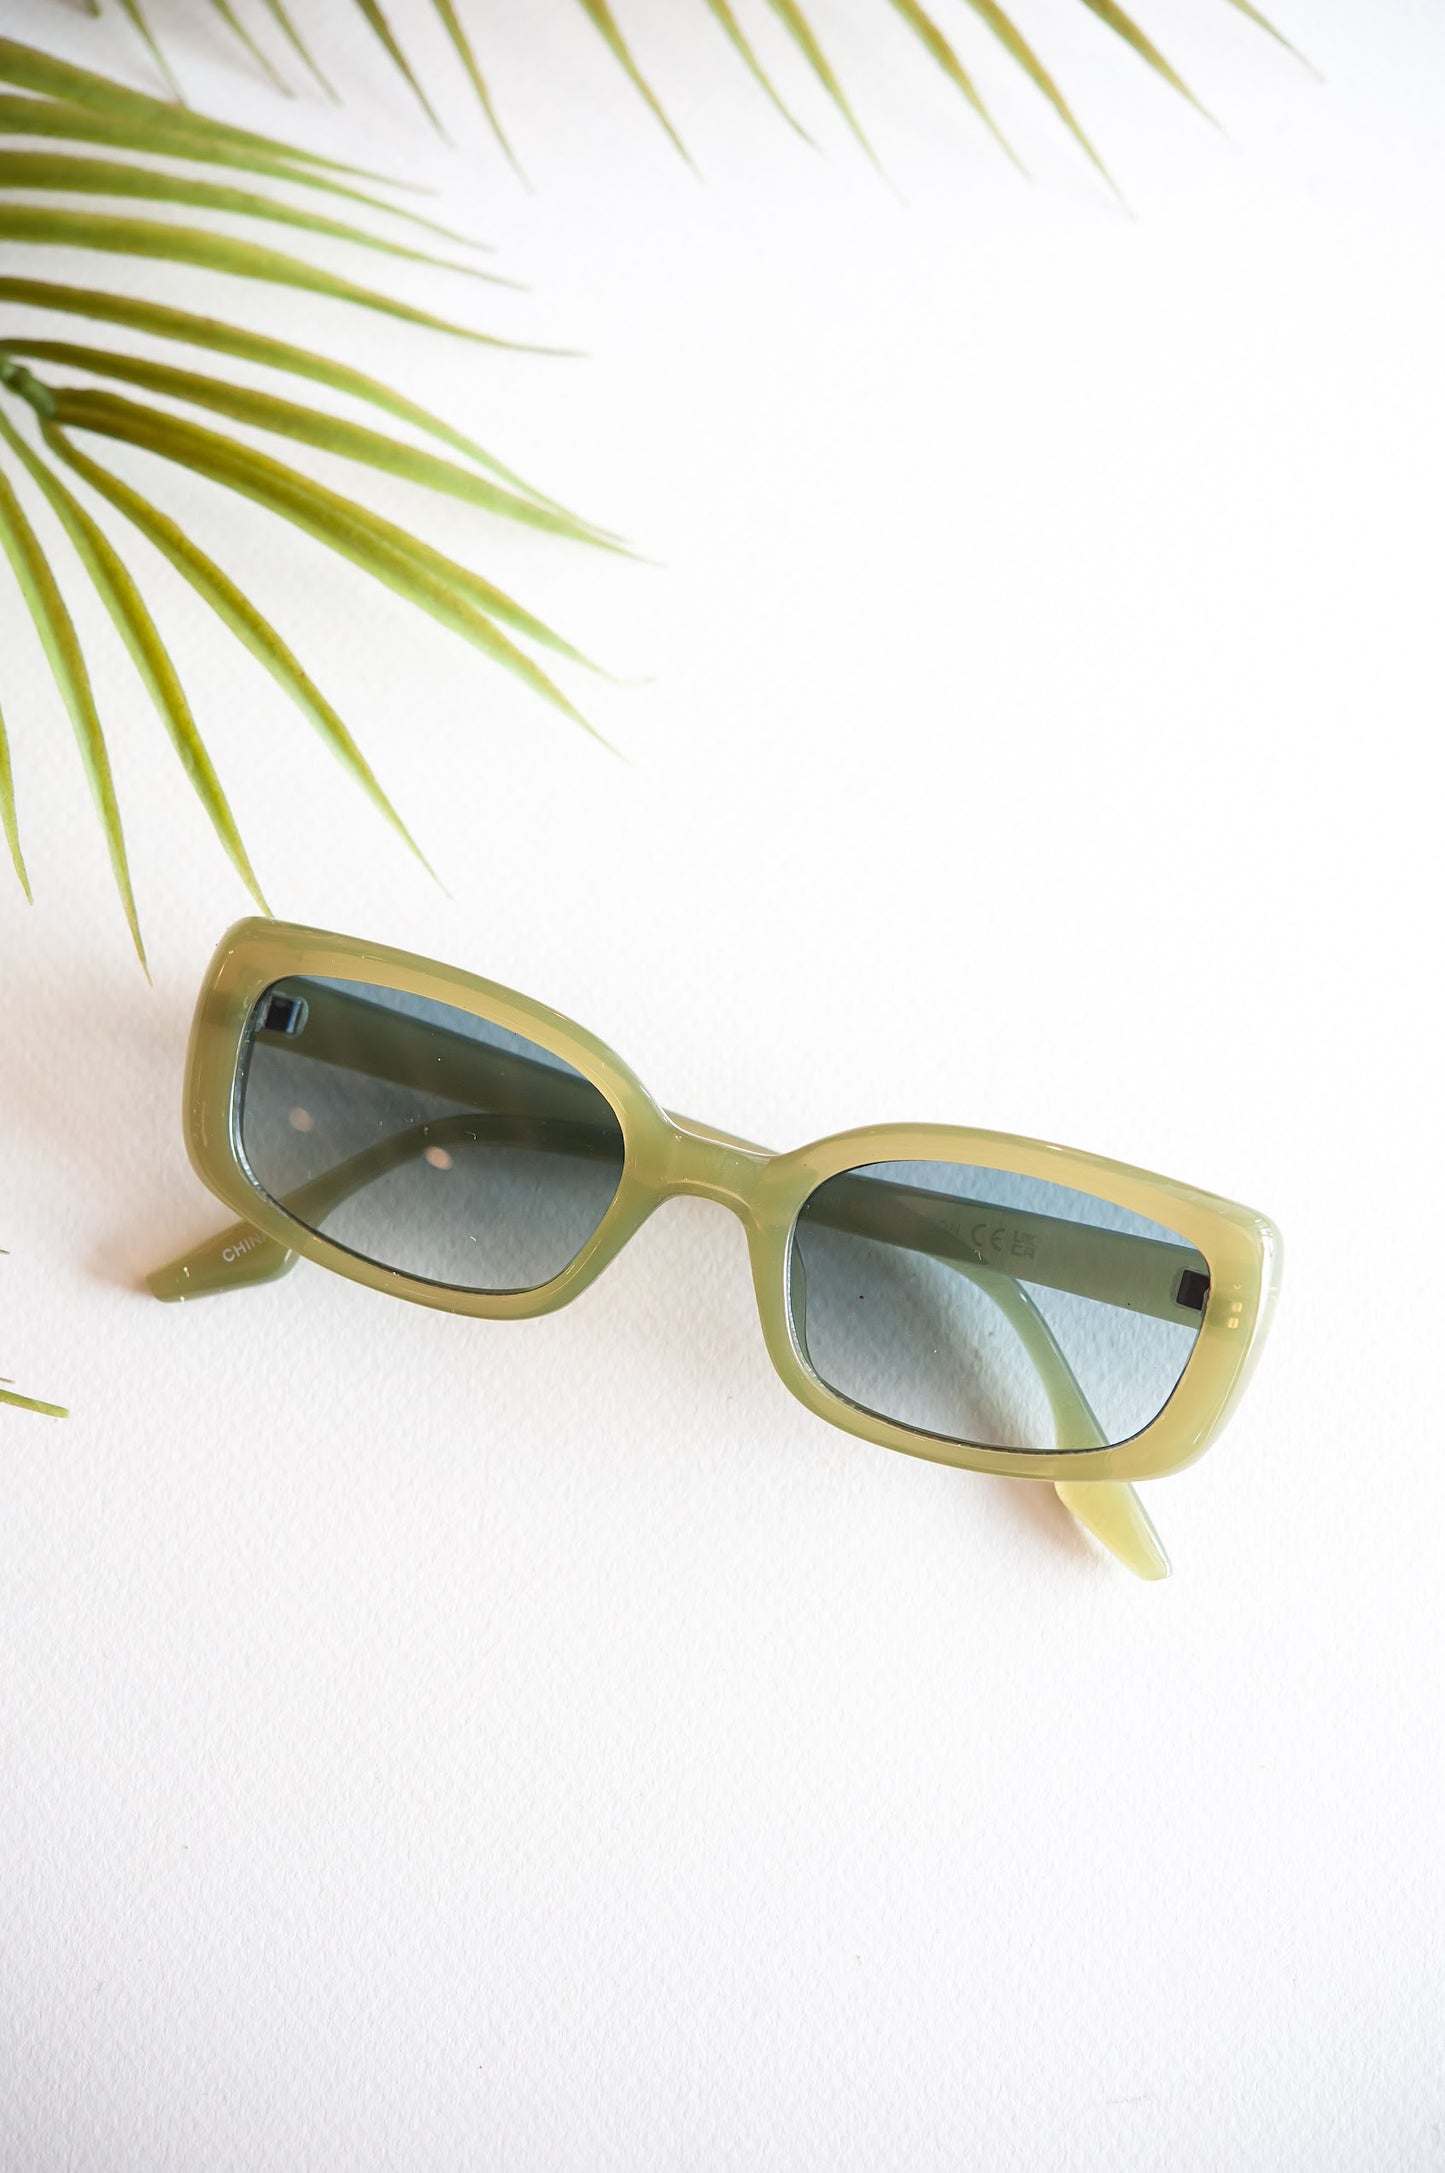 Catalina Small Rectangle Sunglasses | Colorful Acetate Sunglasses | Trendy Small Framed Sunnies